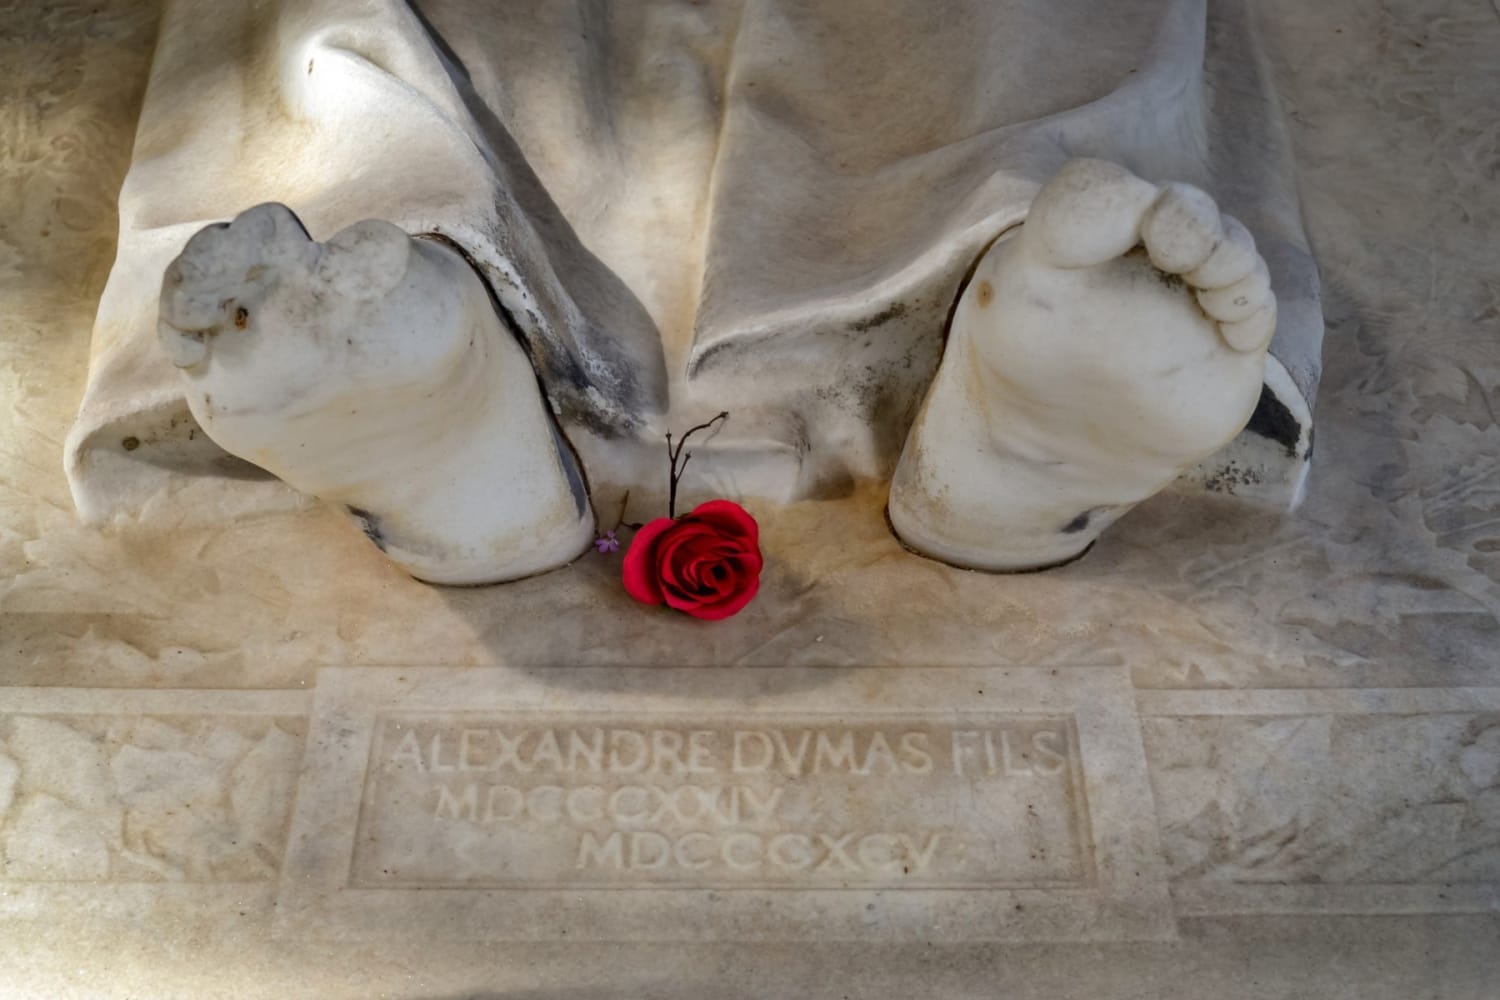 Montmartre Cemetery: The final resting place of many famous Parisians